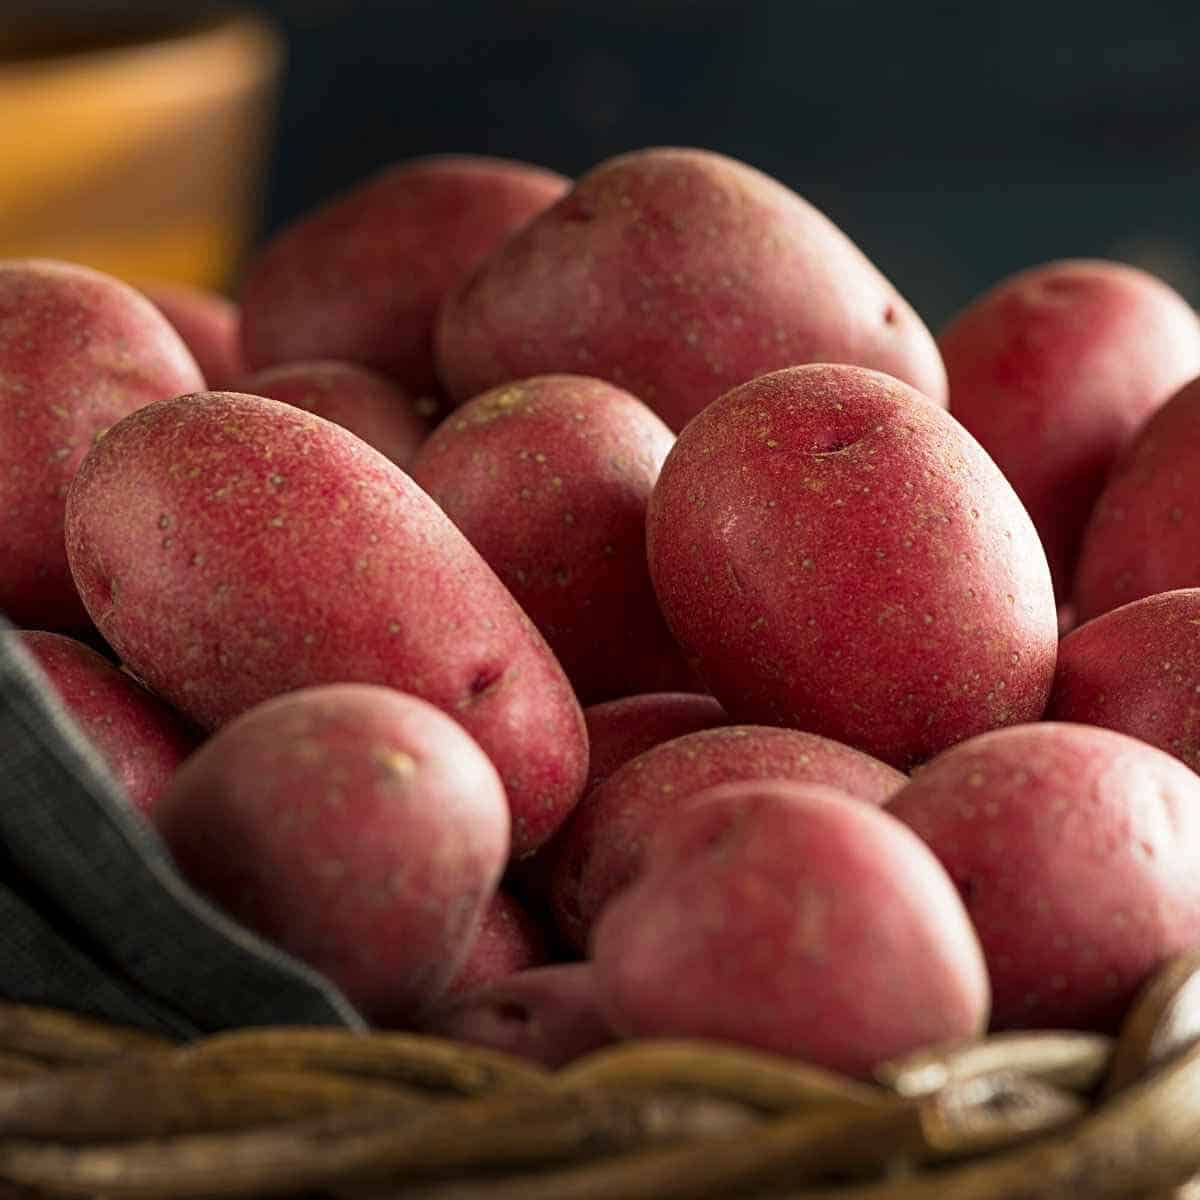 Several pounds of fresh red skin potatoes in a basket.